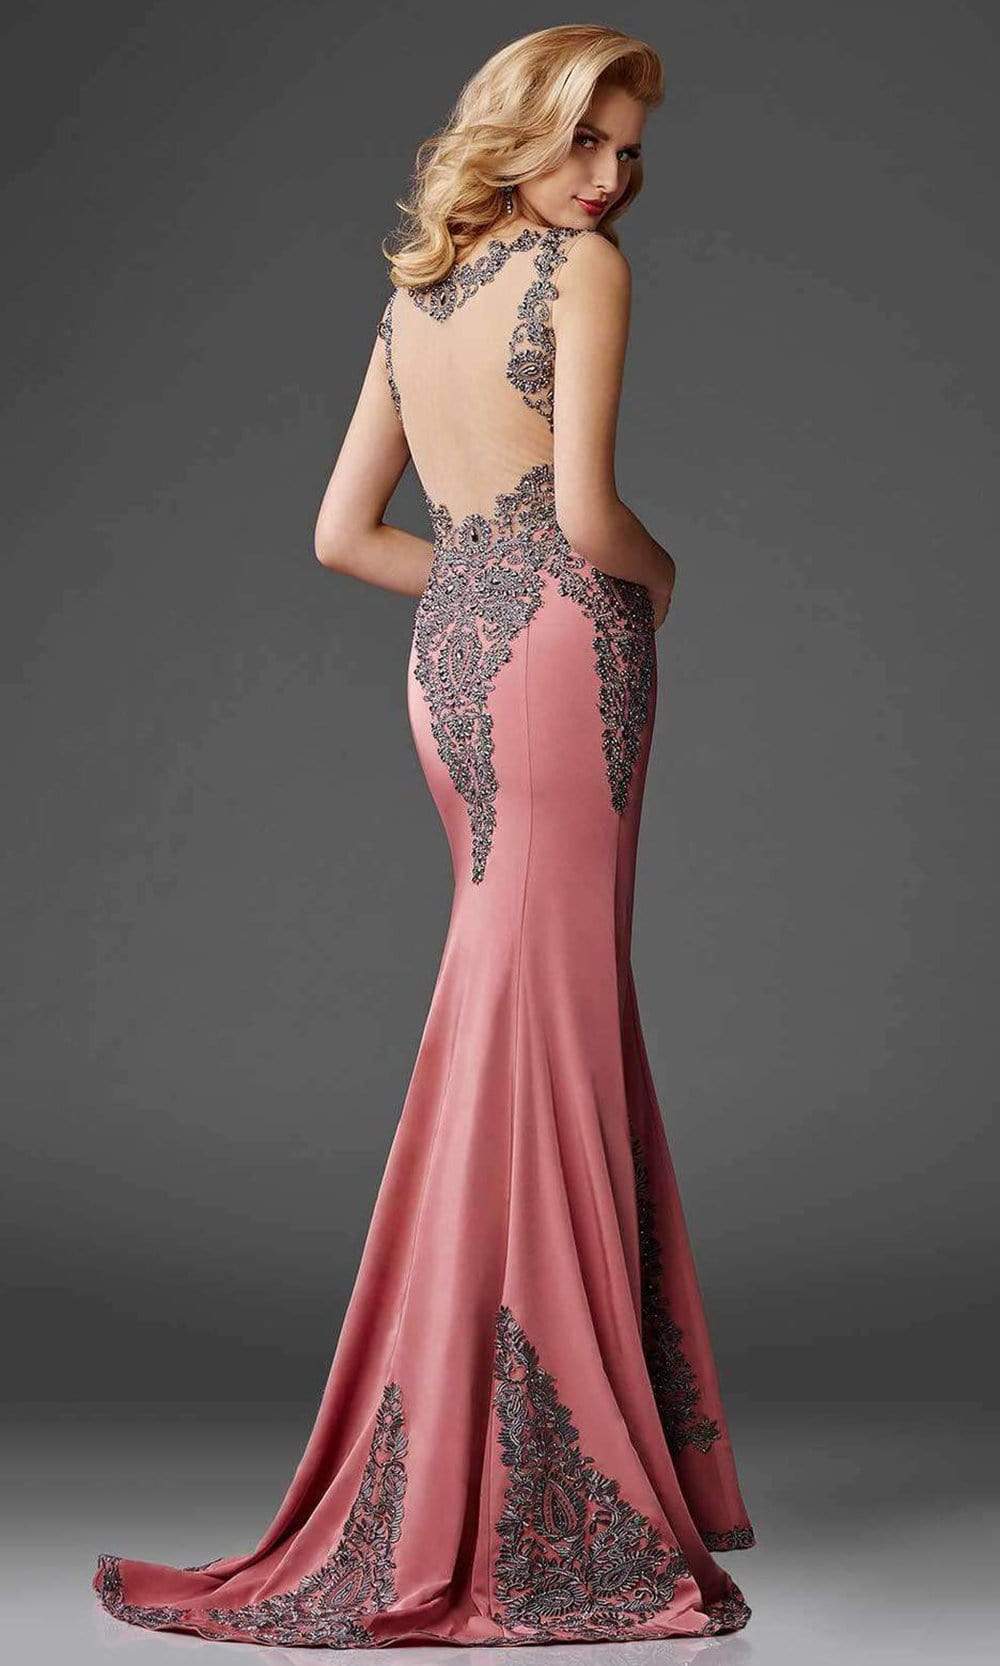 Clarisse - M6419 Intricate Embellished Lace Sheath Gown Special Occasion Dress 10 / Rose